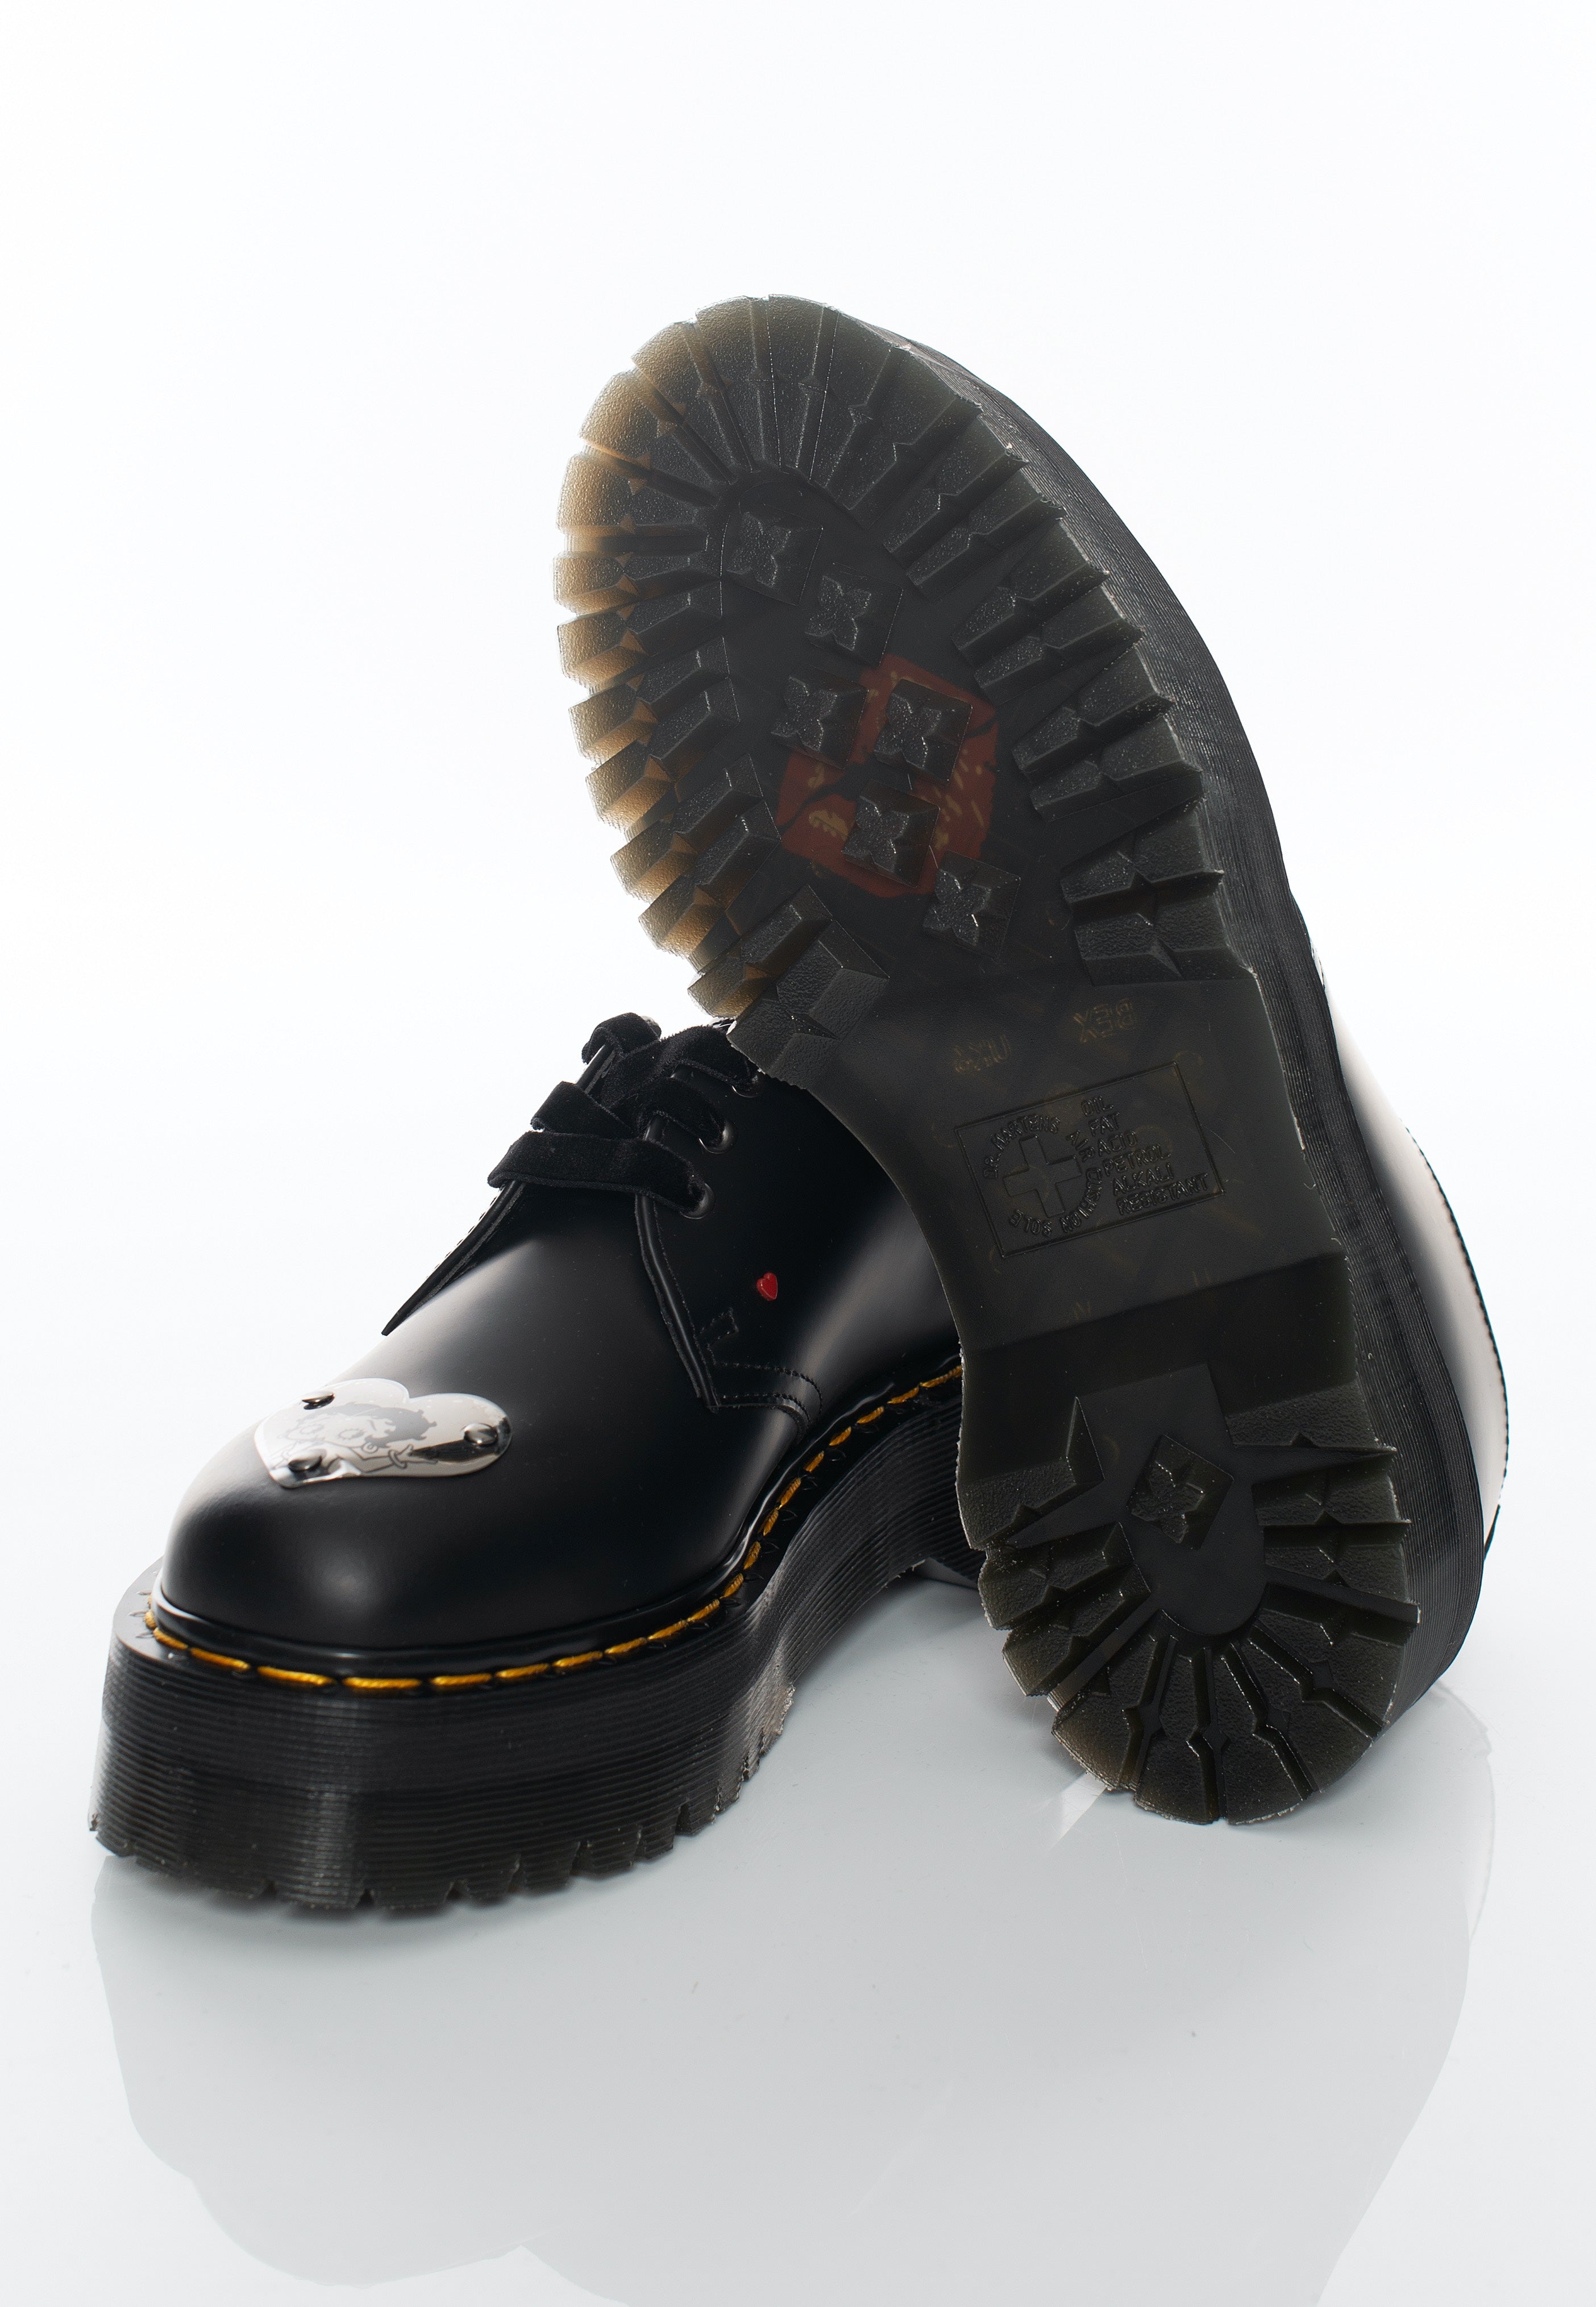 Dr. Martens x Betty Boop - 1461 Quad Black Smooth - Girl Shoes